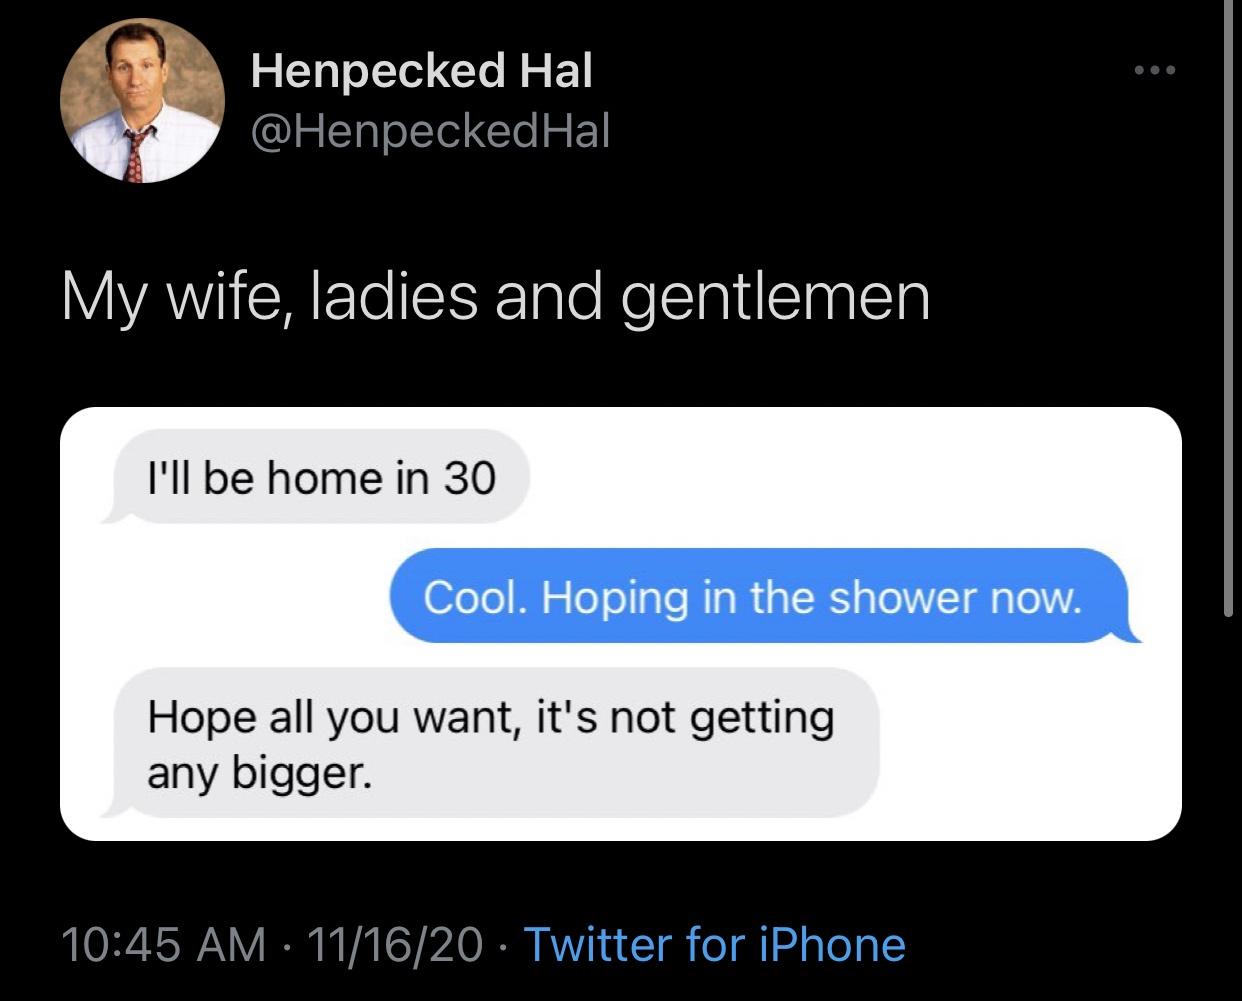 multimedia - Henpecked Hal My wife, ladies and gentlemen I'll be home in 30 Cool. Hoping in the shower now. Hope all you want, it's not getting any bigger. 111620 Twitter for iPhone